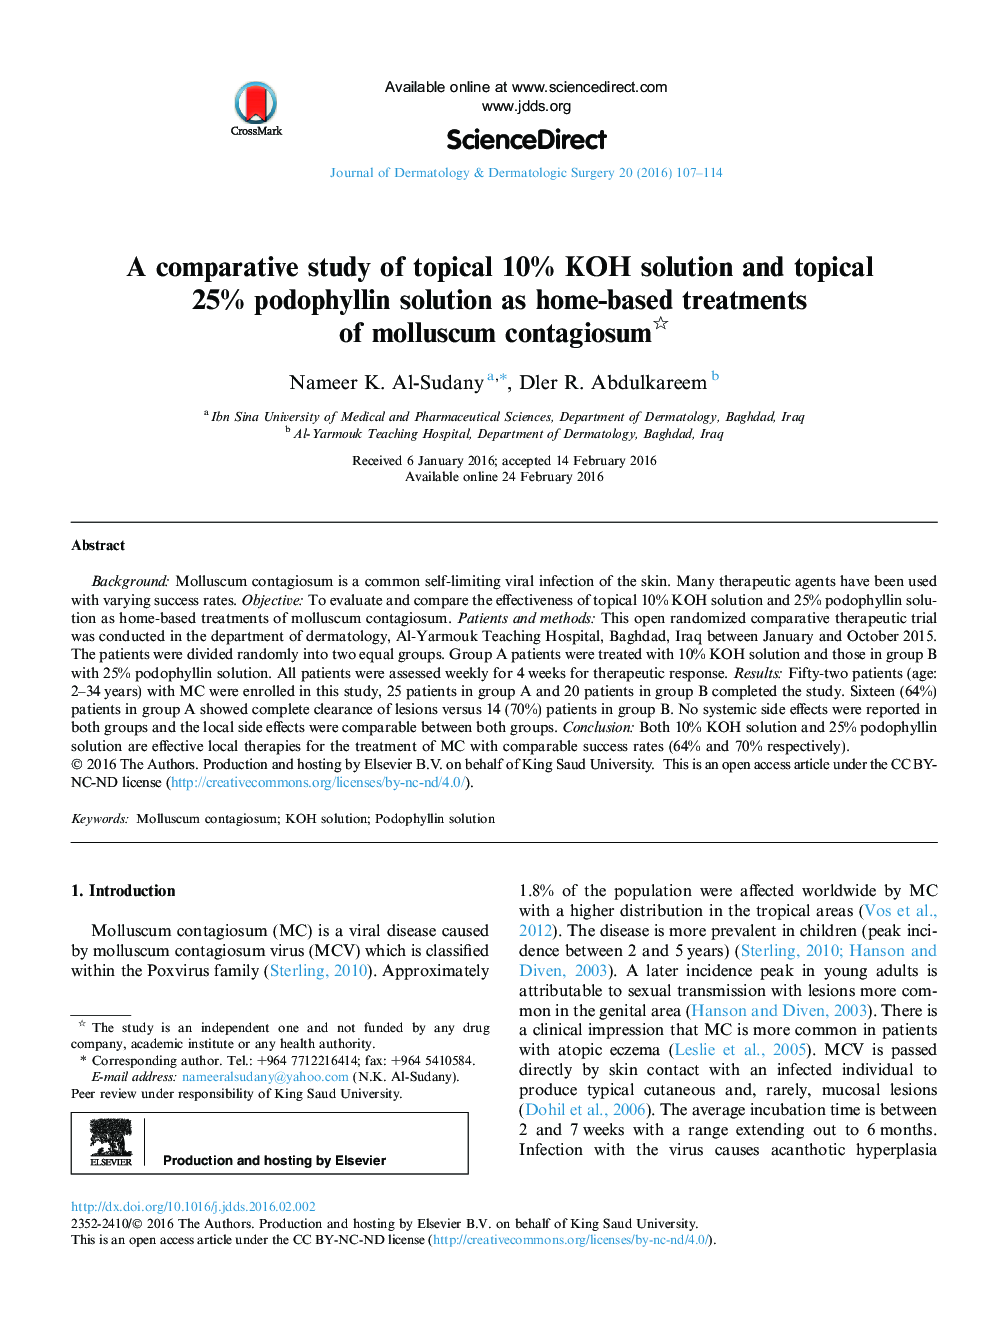 A comparative study of topical 10% KOH solution and topical 25% podophyllin solution as home-based treatments of molluscum contagiosum 